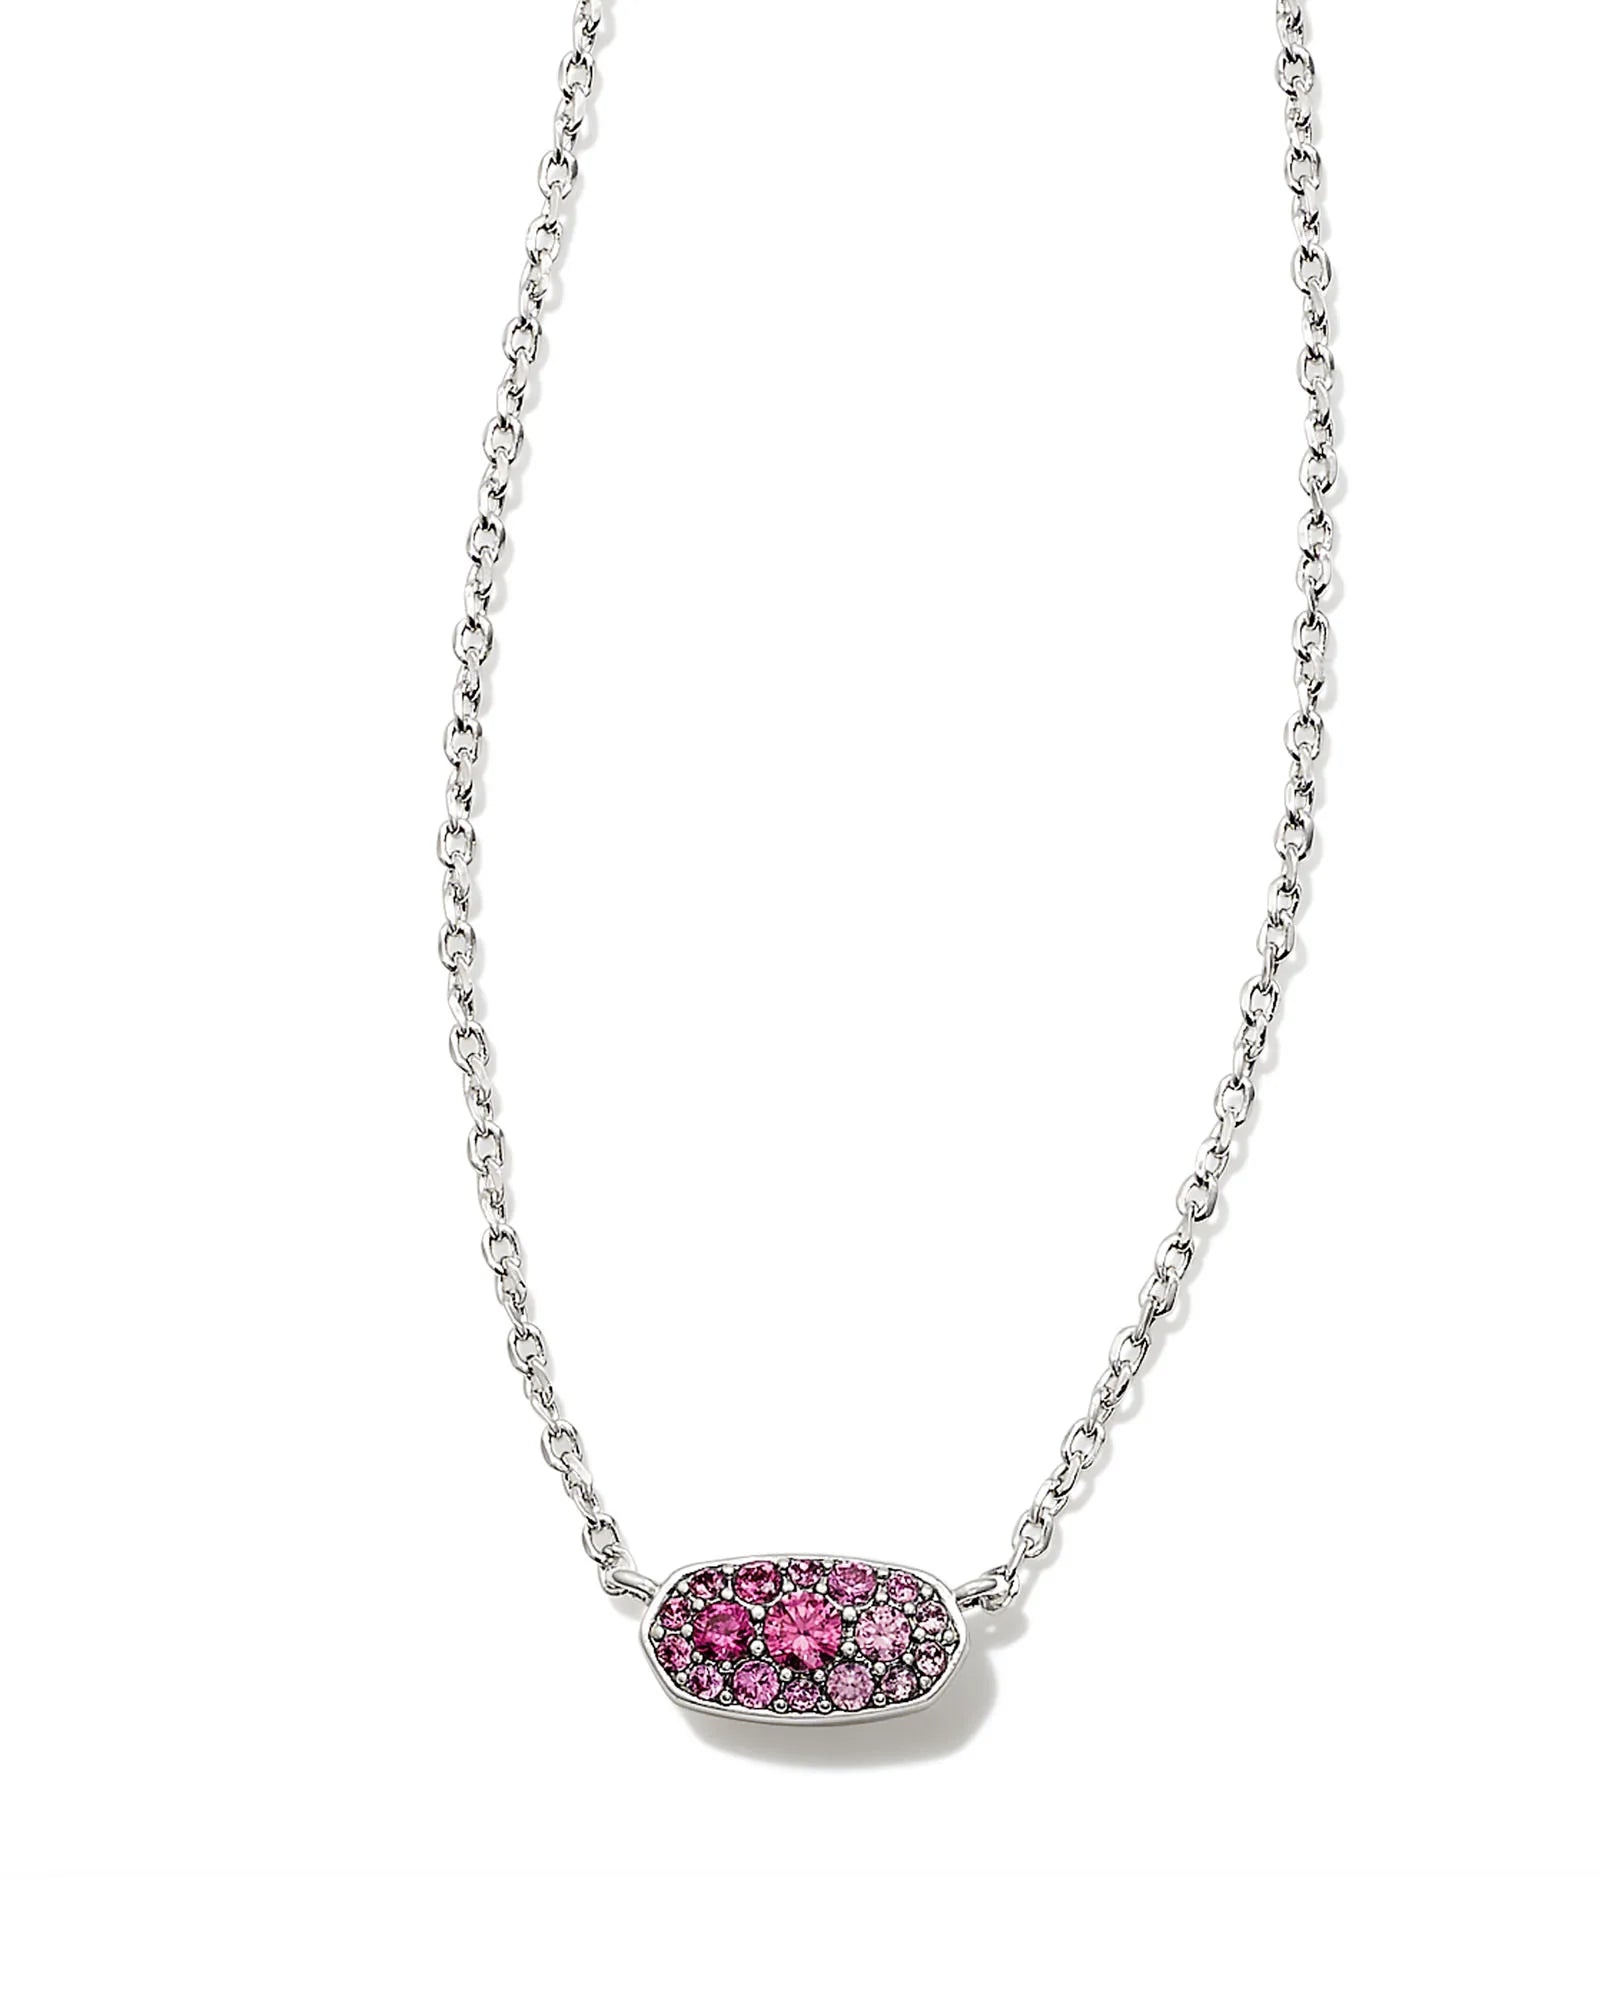 KENDRA SCOTT- Grayson Silver Crystal Pendant Necklace in Pink Ombre